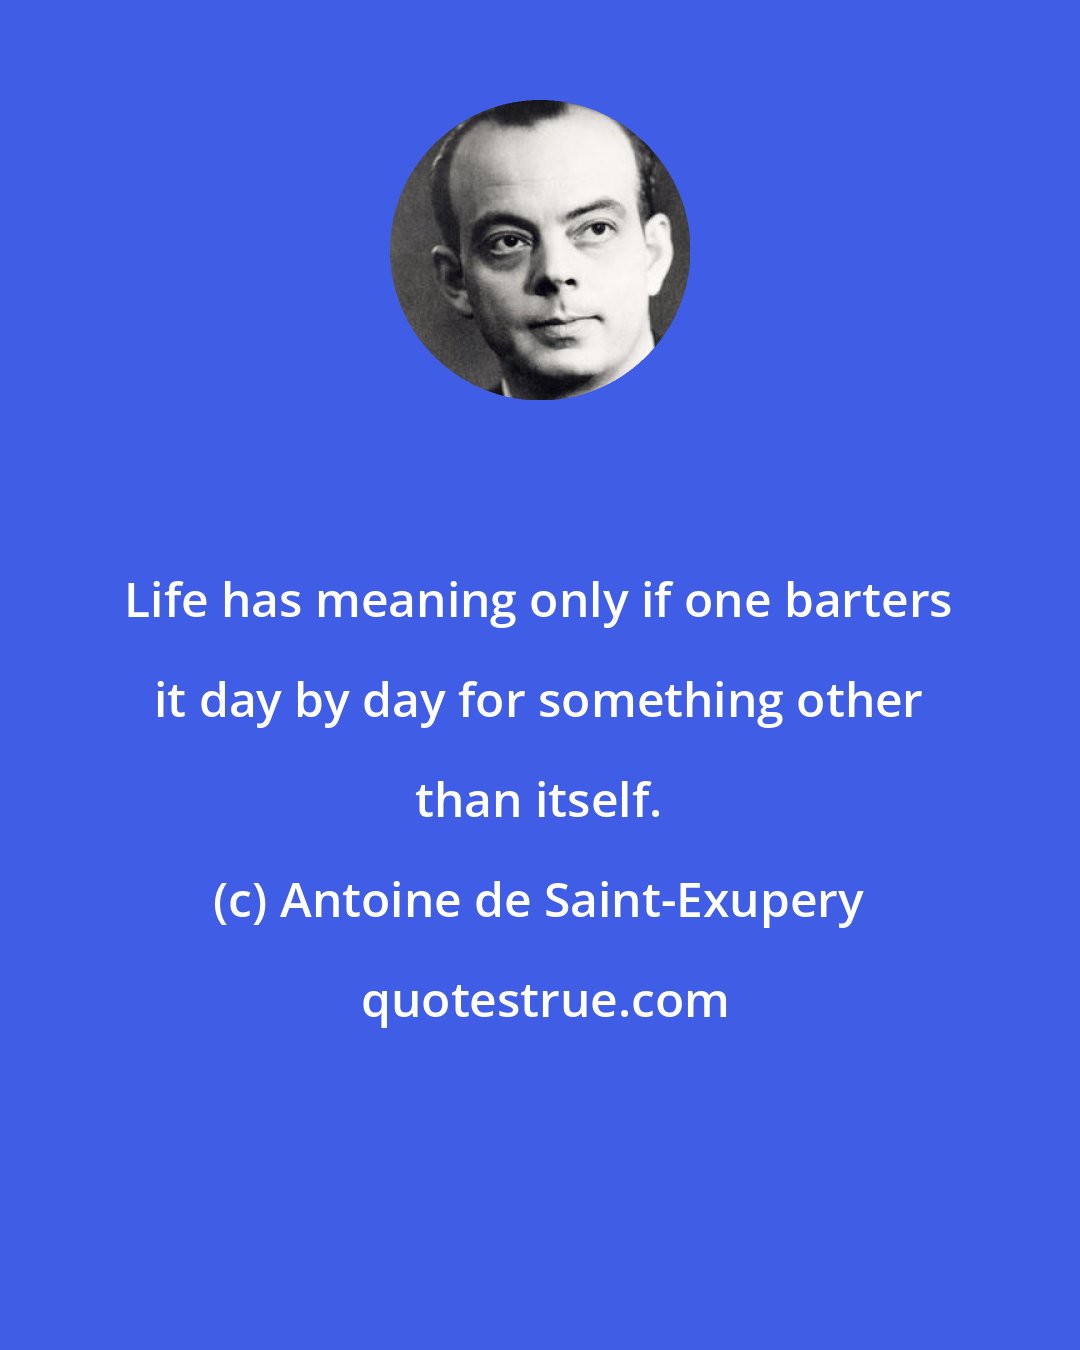 Antoine de Saint-Exupery: Life has meaning only if one barters it day by day for something other than itself.